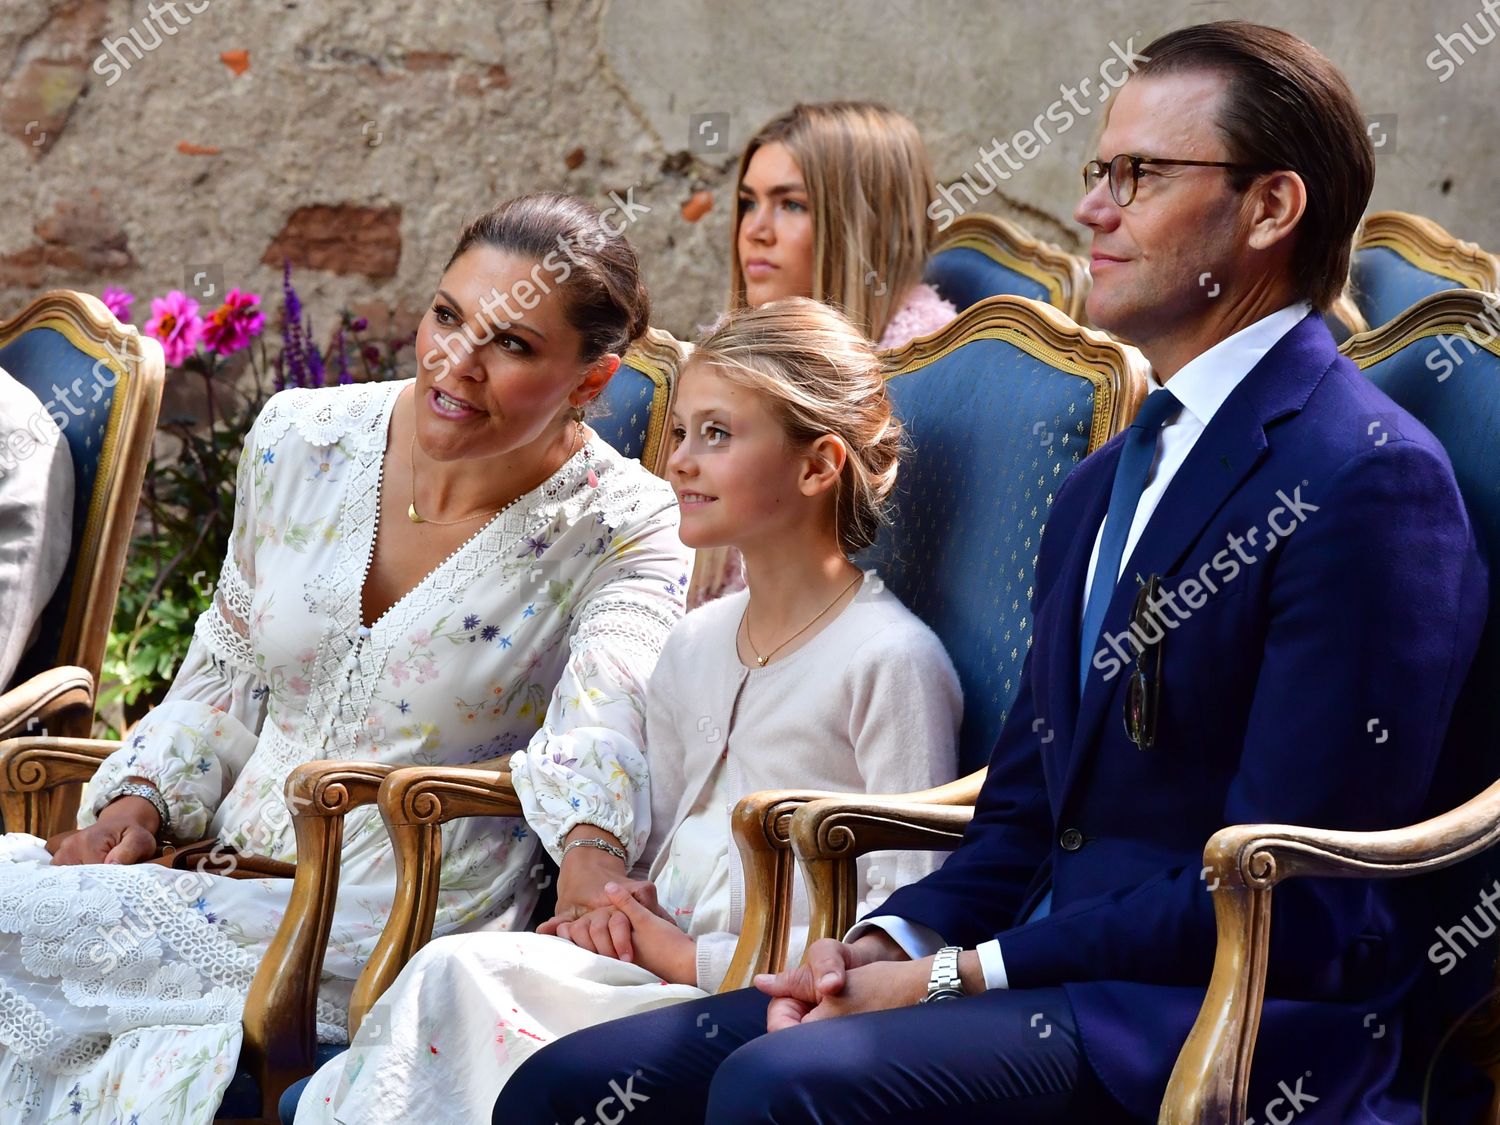 victoria-crown-princess-of-sweden-birthday-celebrations-solliden-palace-borgholm-sweden-shutterstock-editorial-10711483ai.jpg